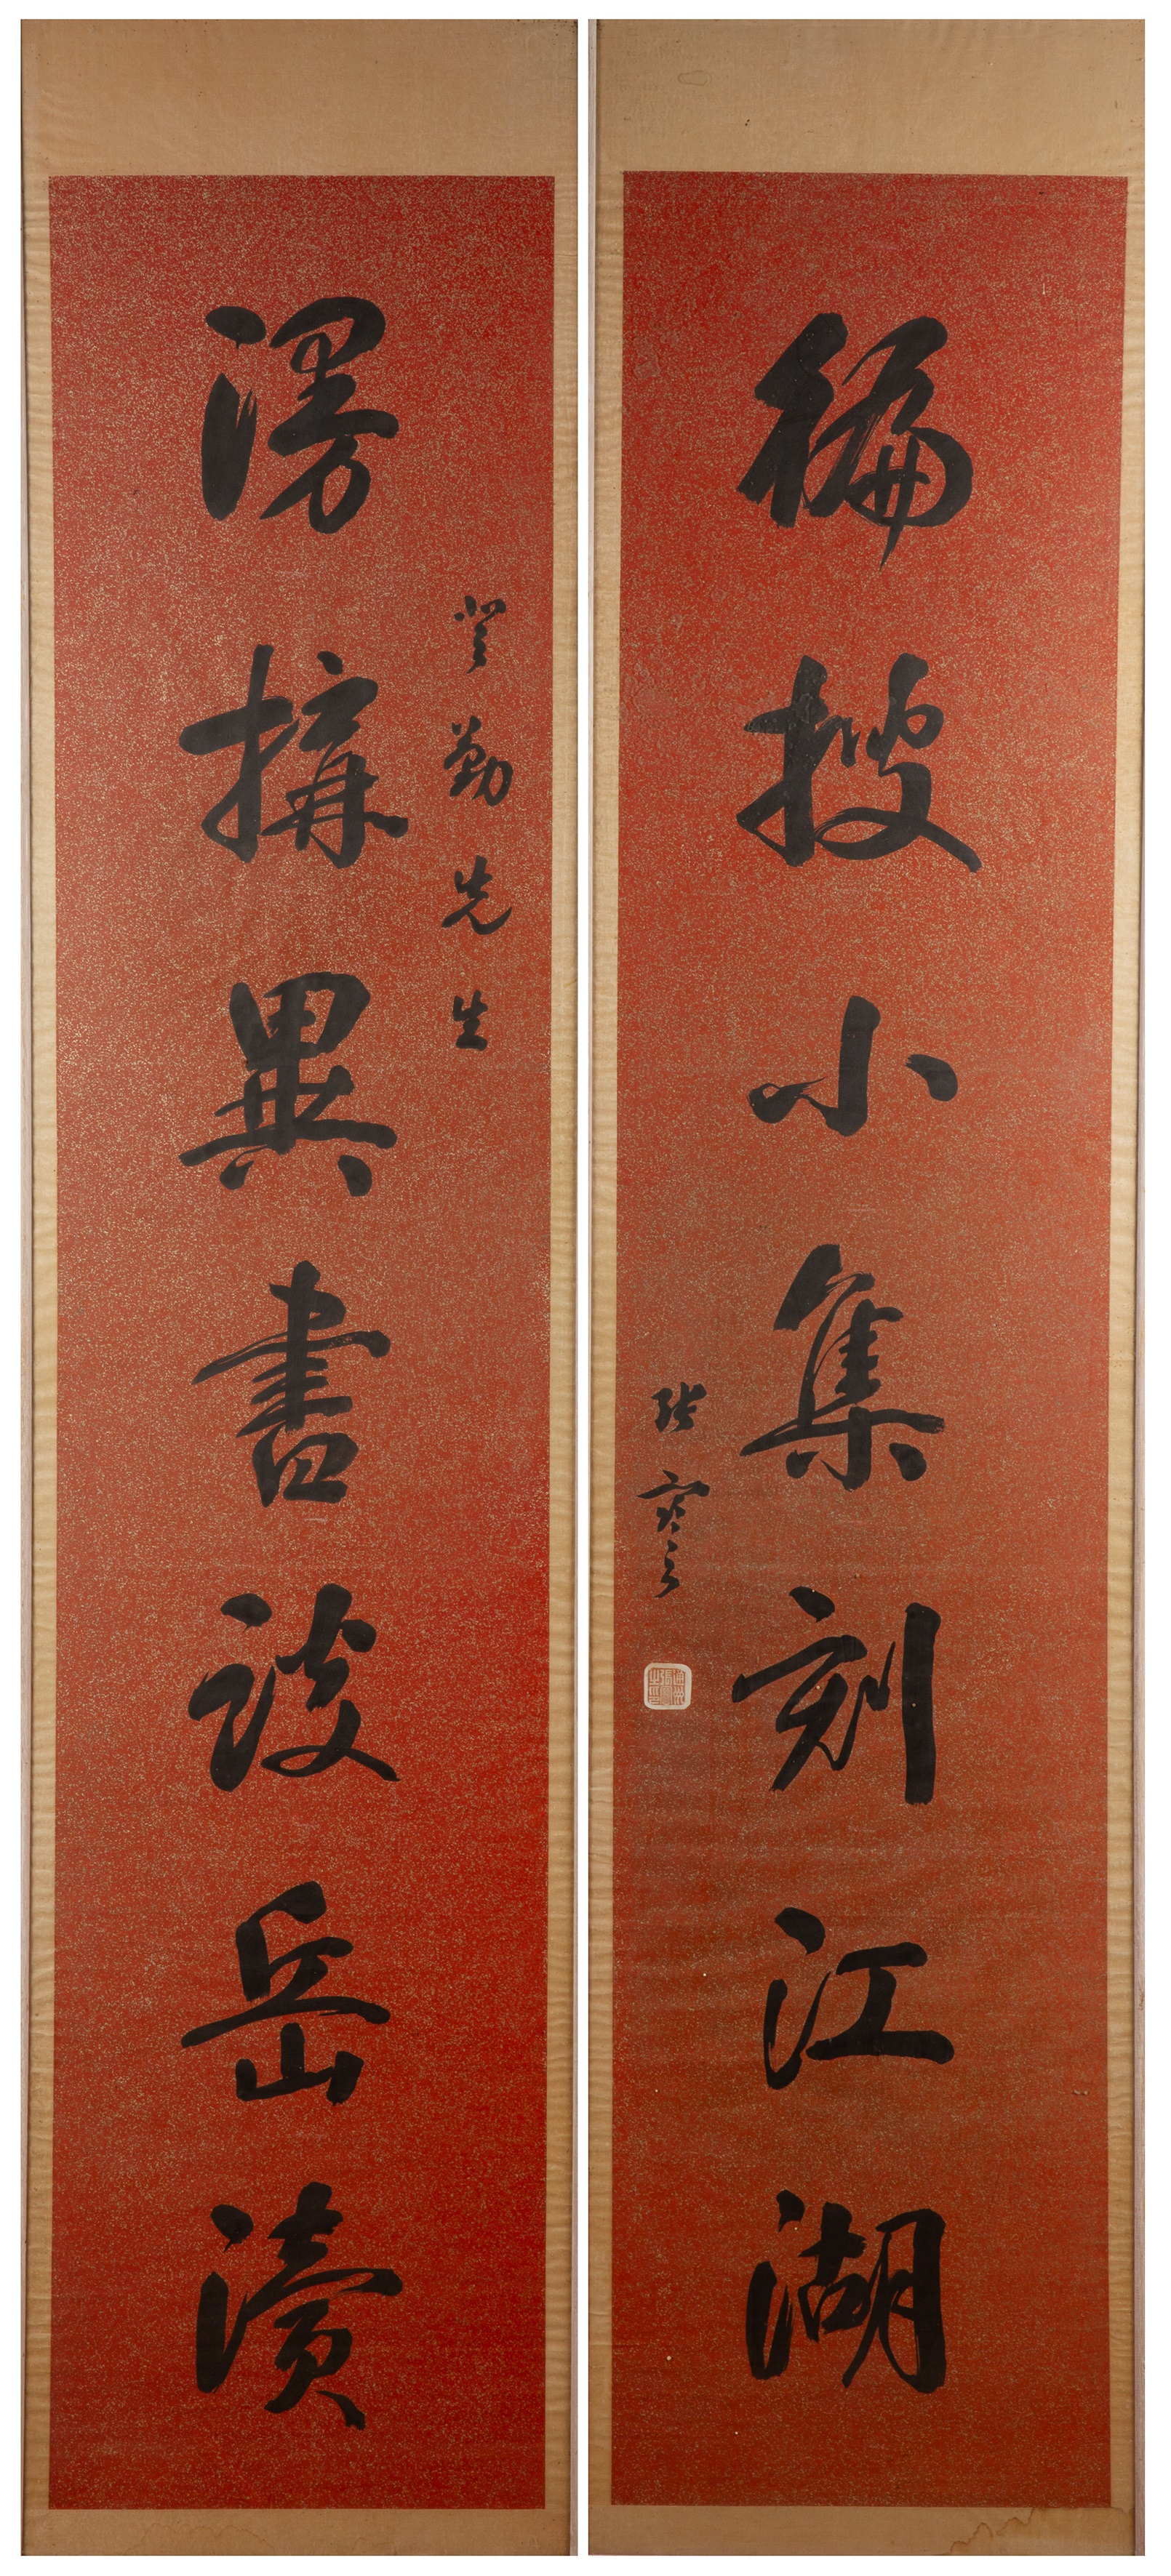 Pair of Calligraphy studies Chinese, 20th Century ink wash on red and gold speckled ground, 167cm